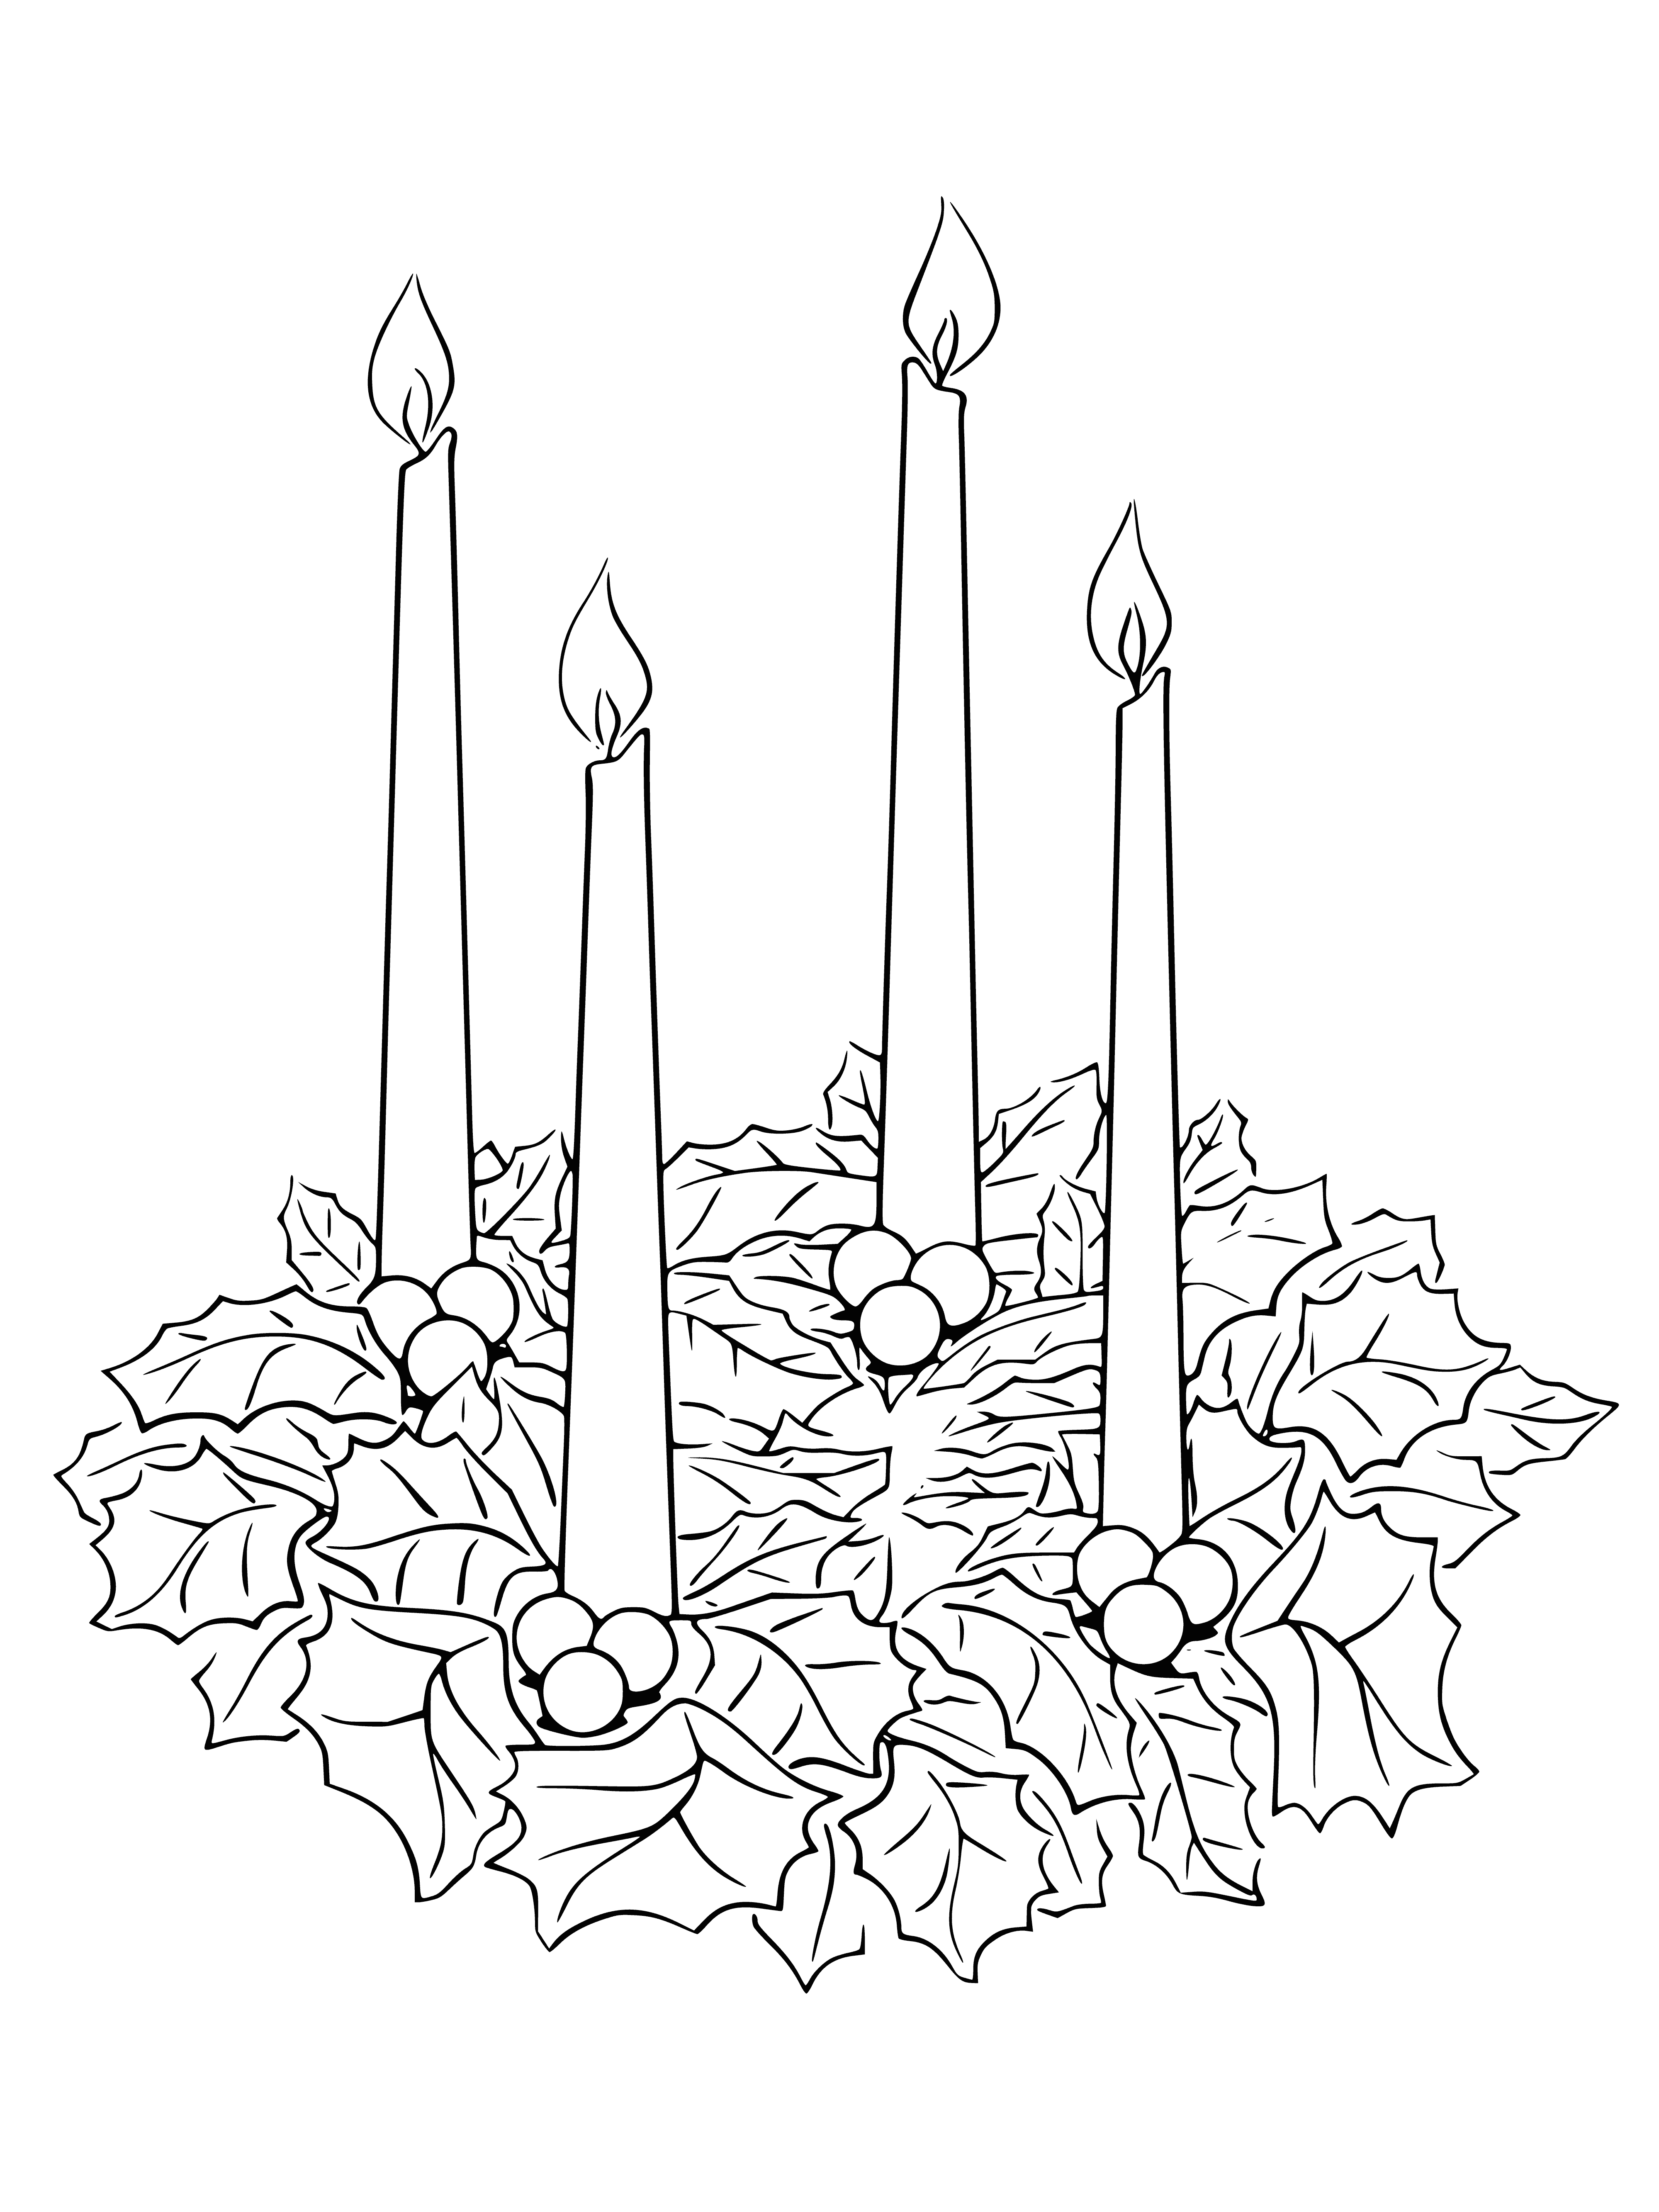 coloring page: 2 wreaths with 5 candles in different colors, decorated with holly & berries - perfect for holiday coloring! #coloringpages